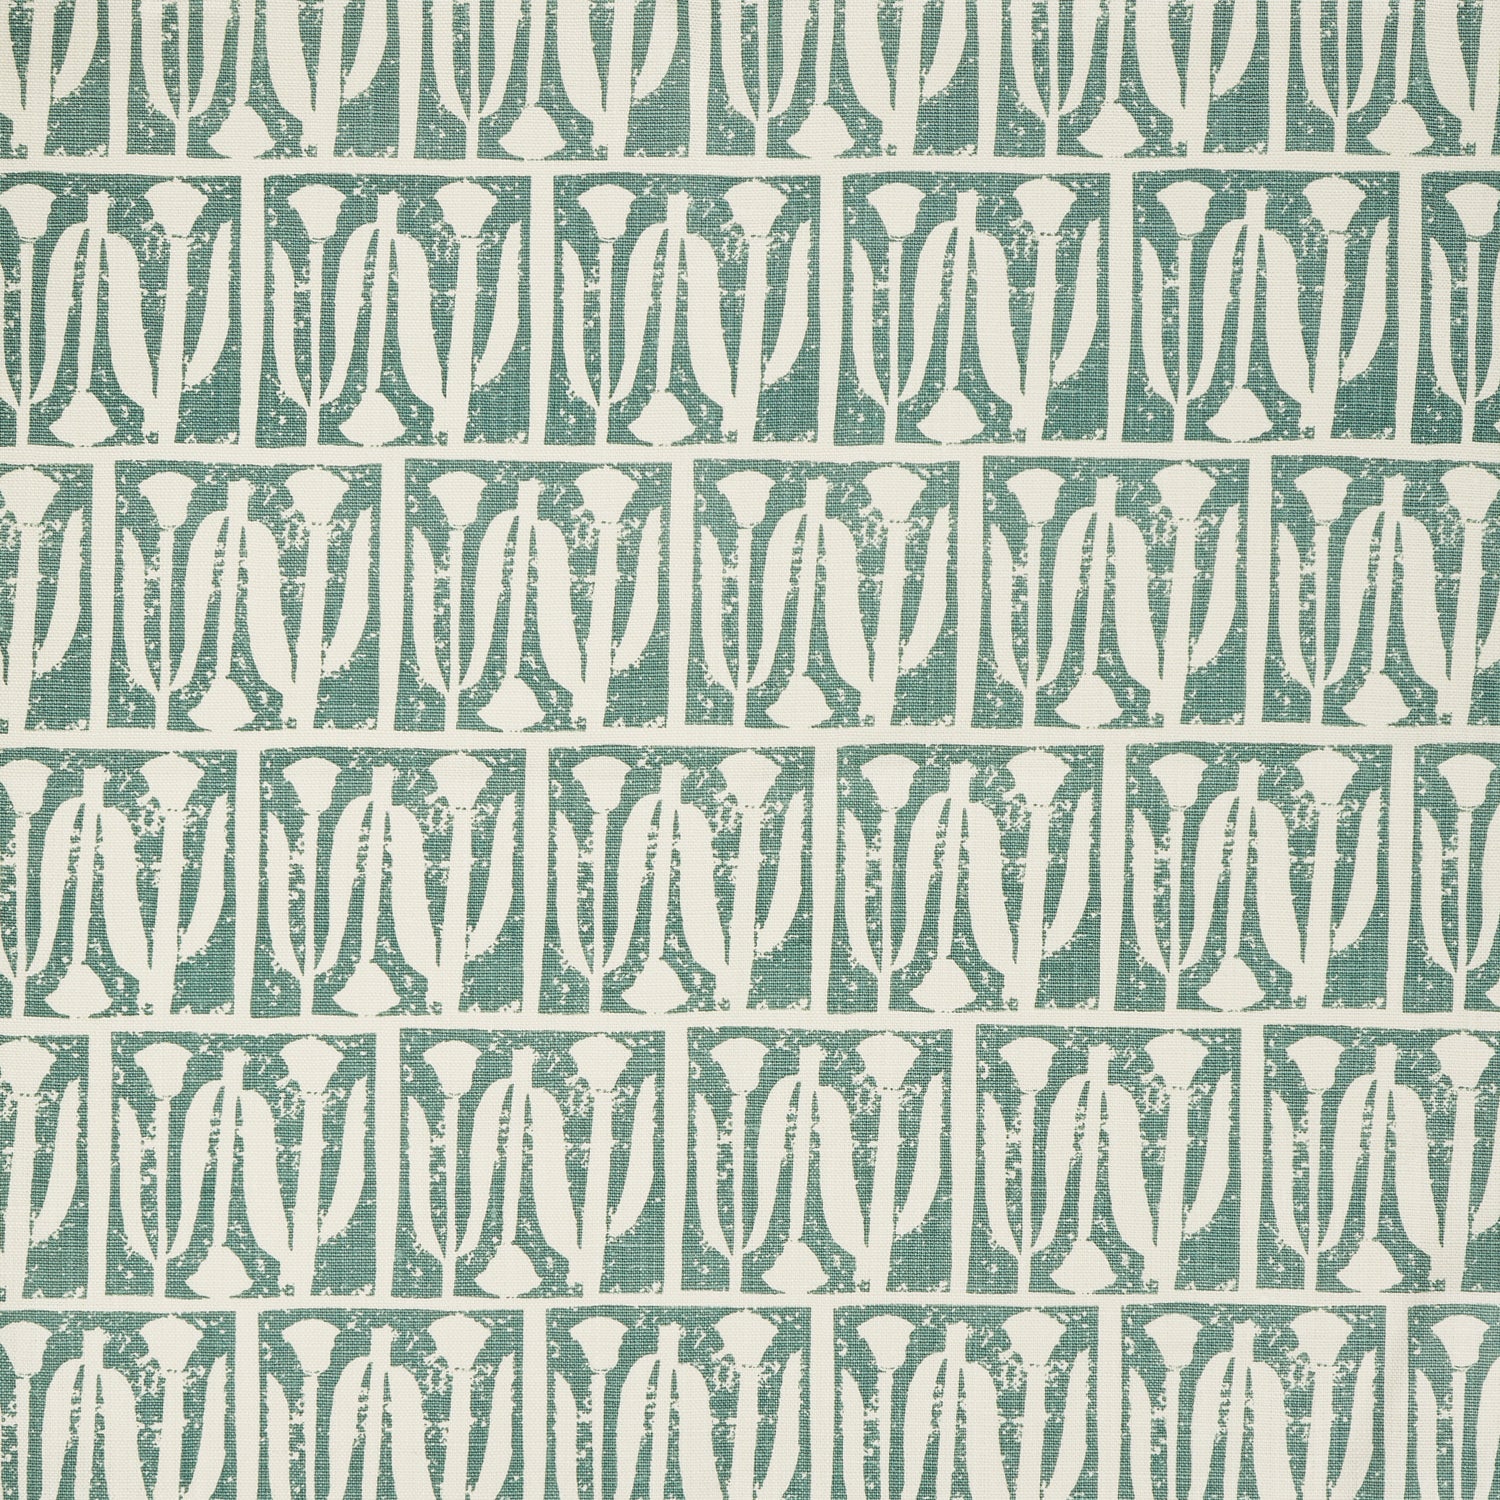 Woven fabric swatch in an abstract tulip print in a repeating stripe on a dusty blue field.